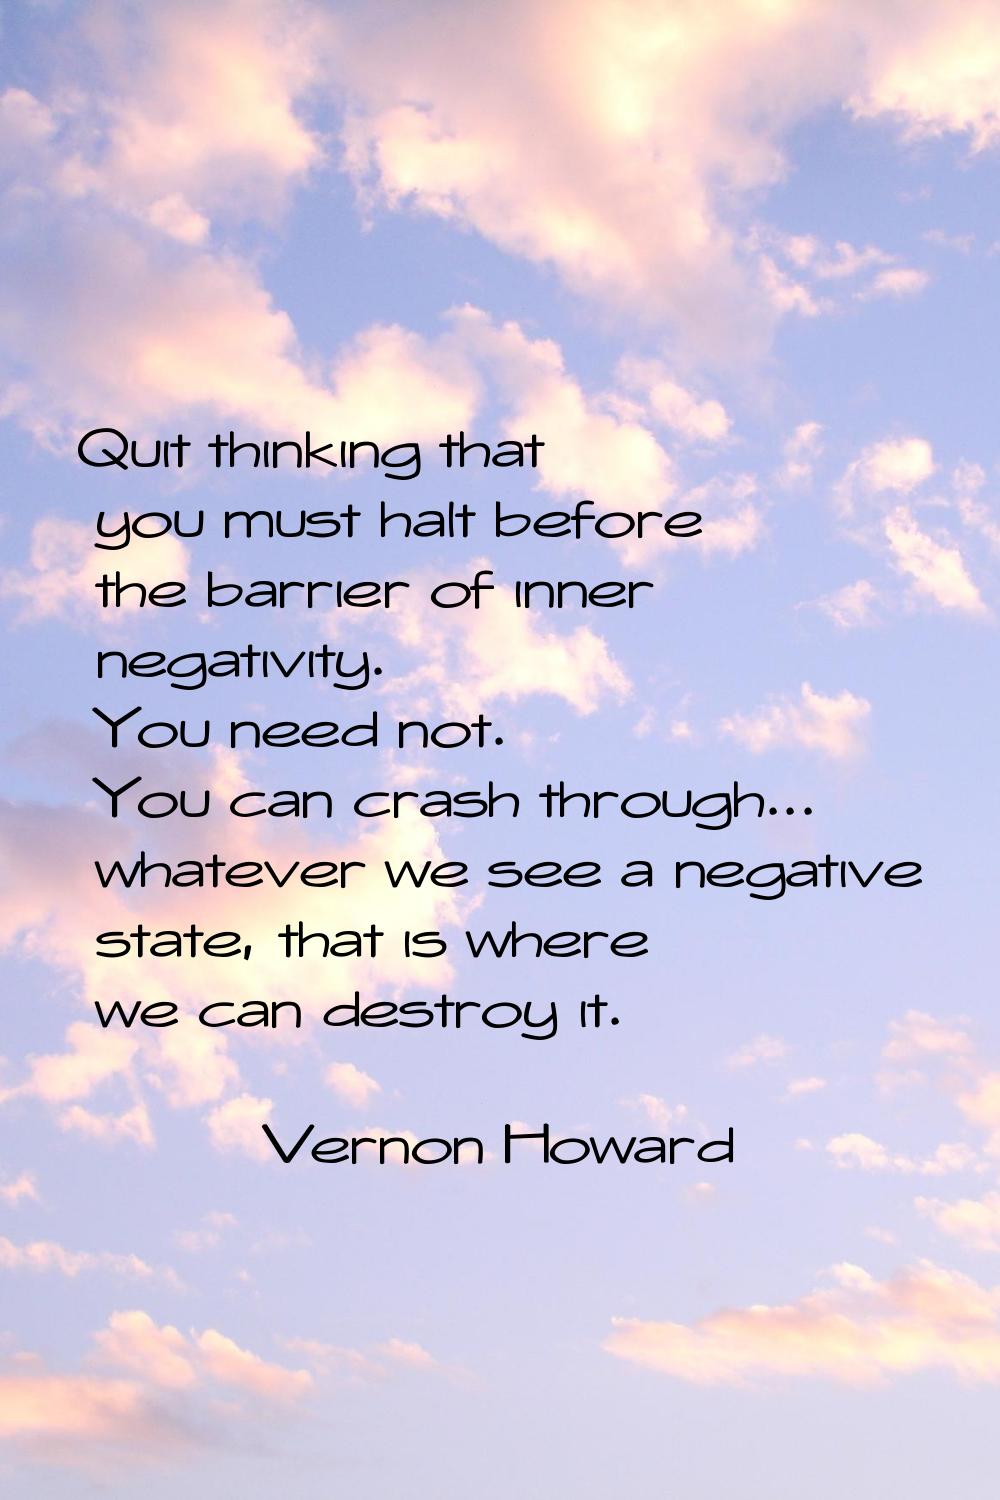 Quit thinking that you must halt before the barrier of inner negativity. You need not. You can cras